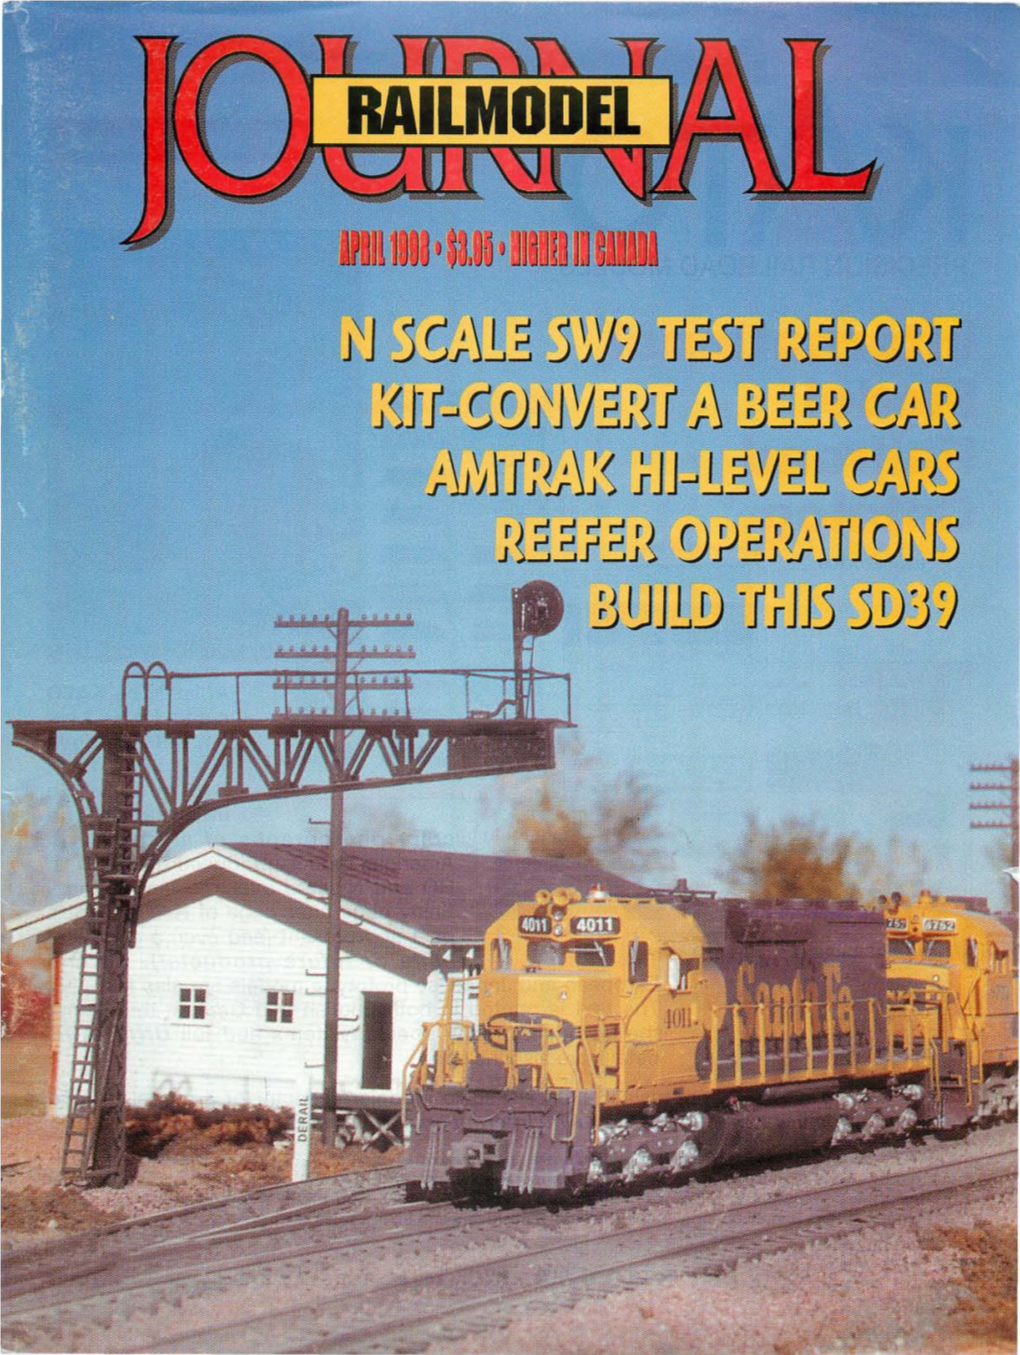 Modeling the Hi-Level Cars in HO Scale from Train Station Kits